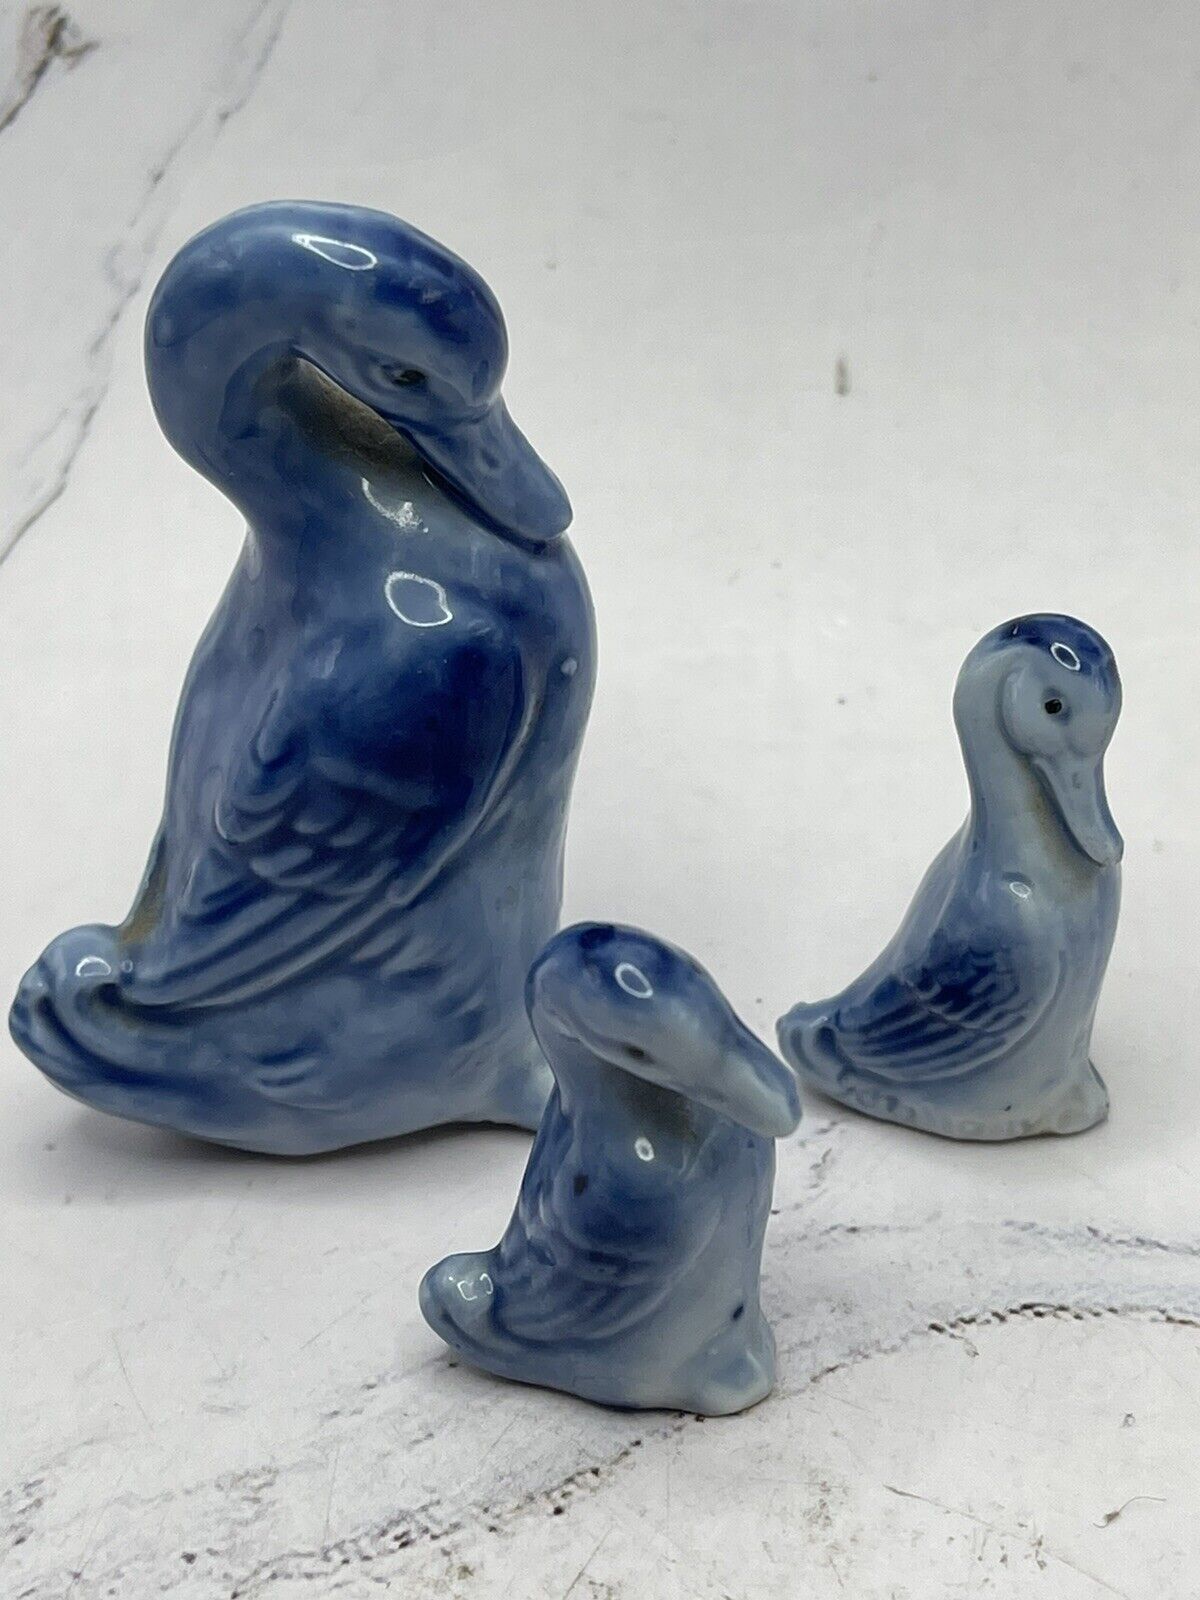 Vintage Set of 3 Miniature Blue Geese Figurines Made in Germany